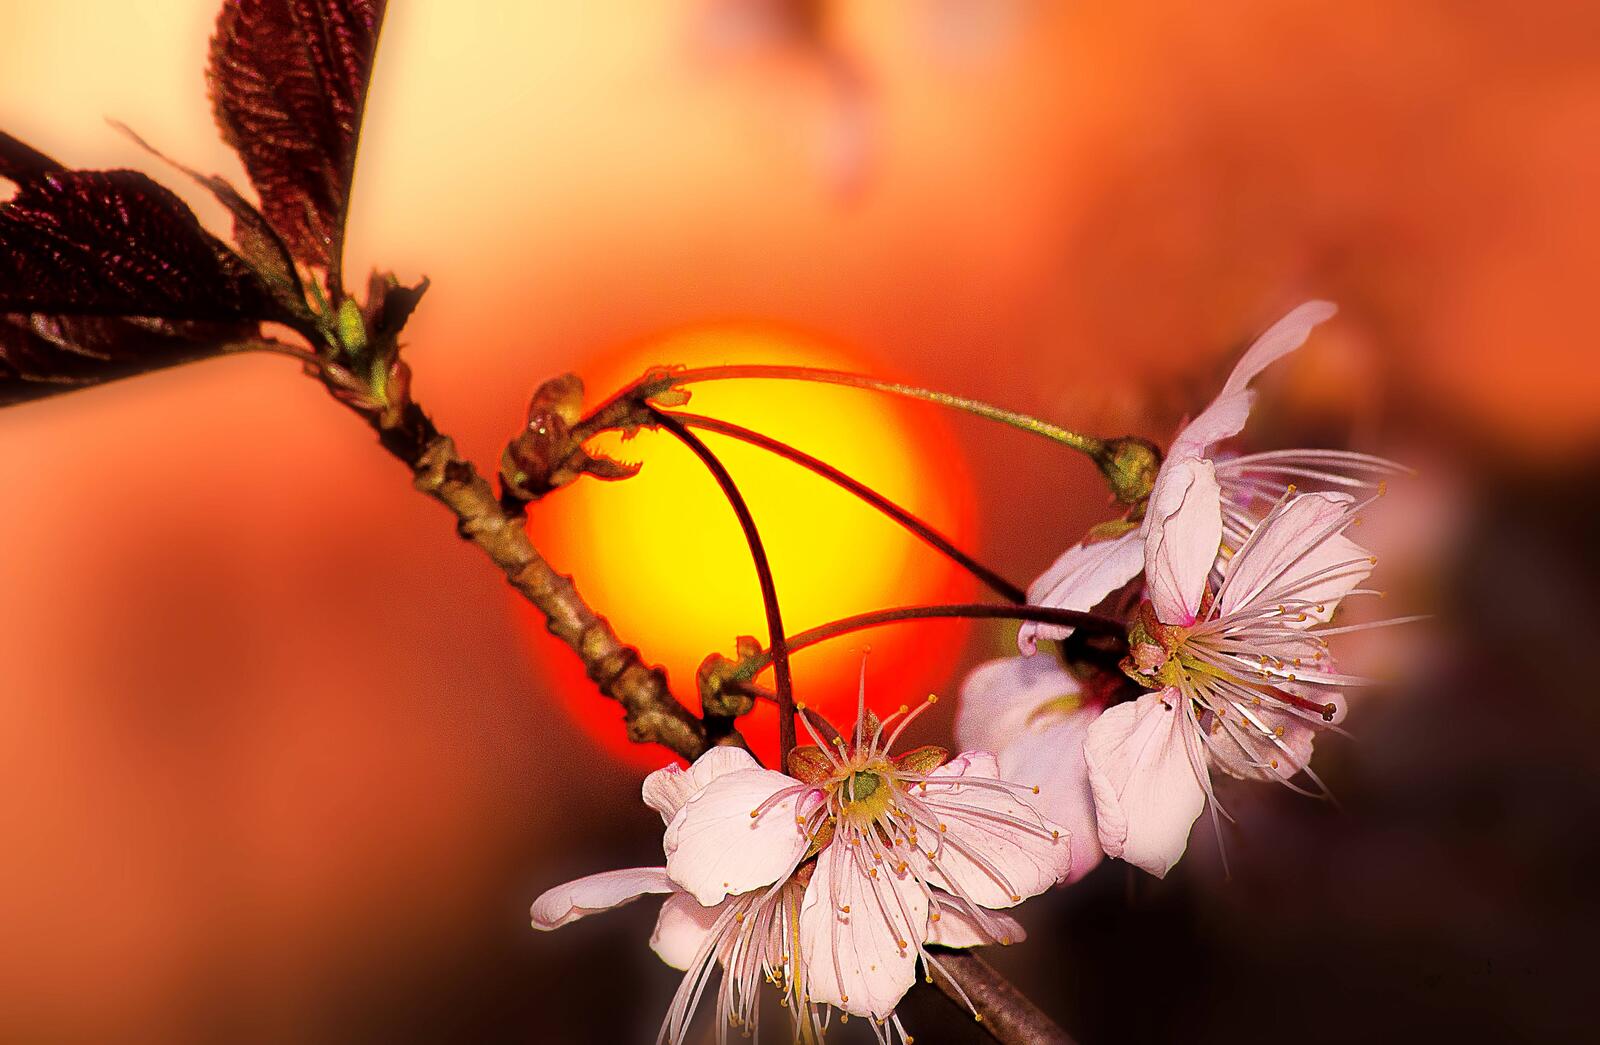 Wallpapers cherry blossoms sunset on the desktop